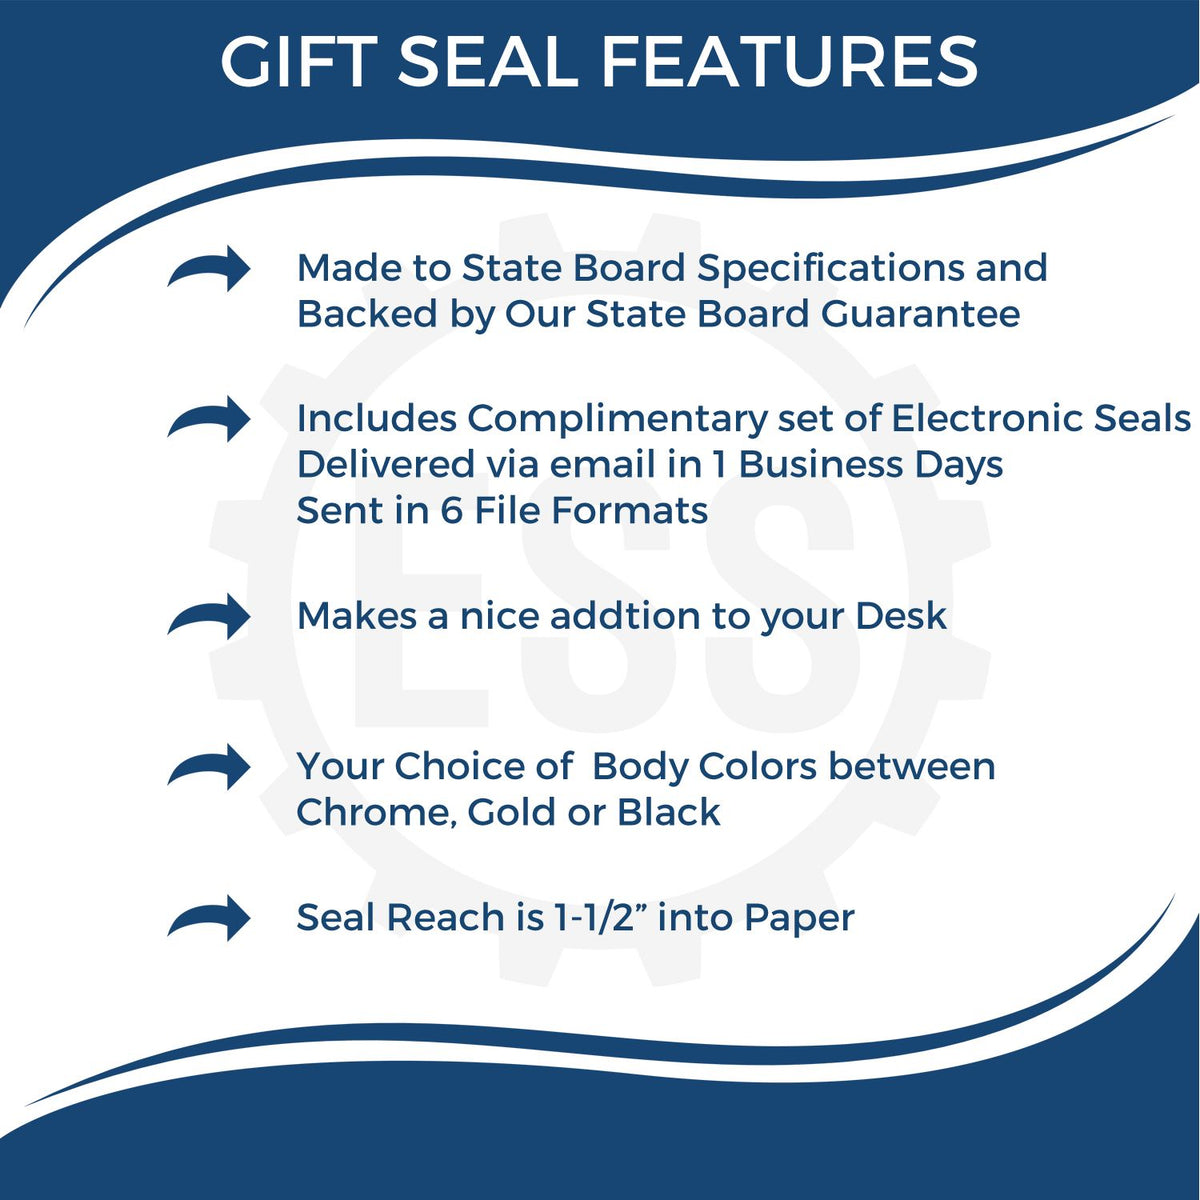 A picture of an infographic highlighting the selling points for the Gift Michigan Land Surveyor Seal